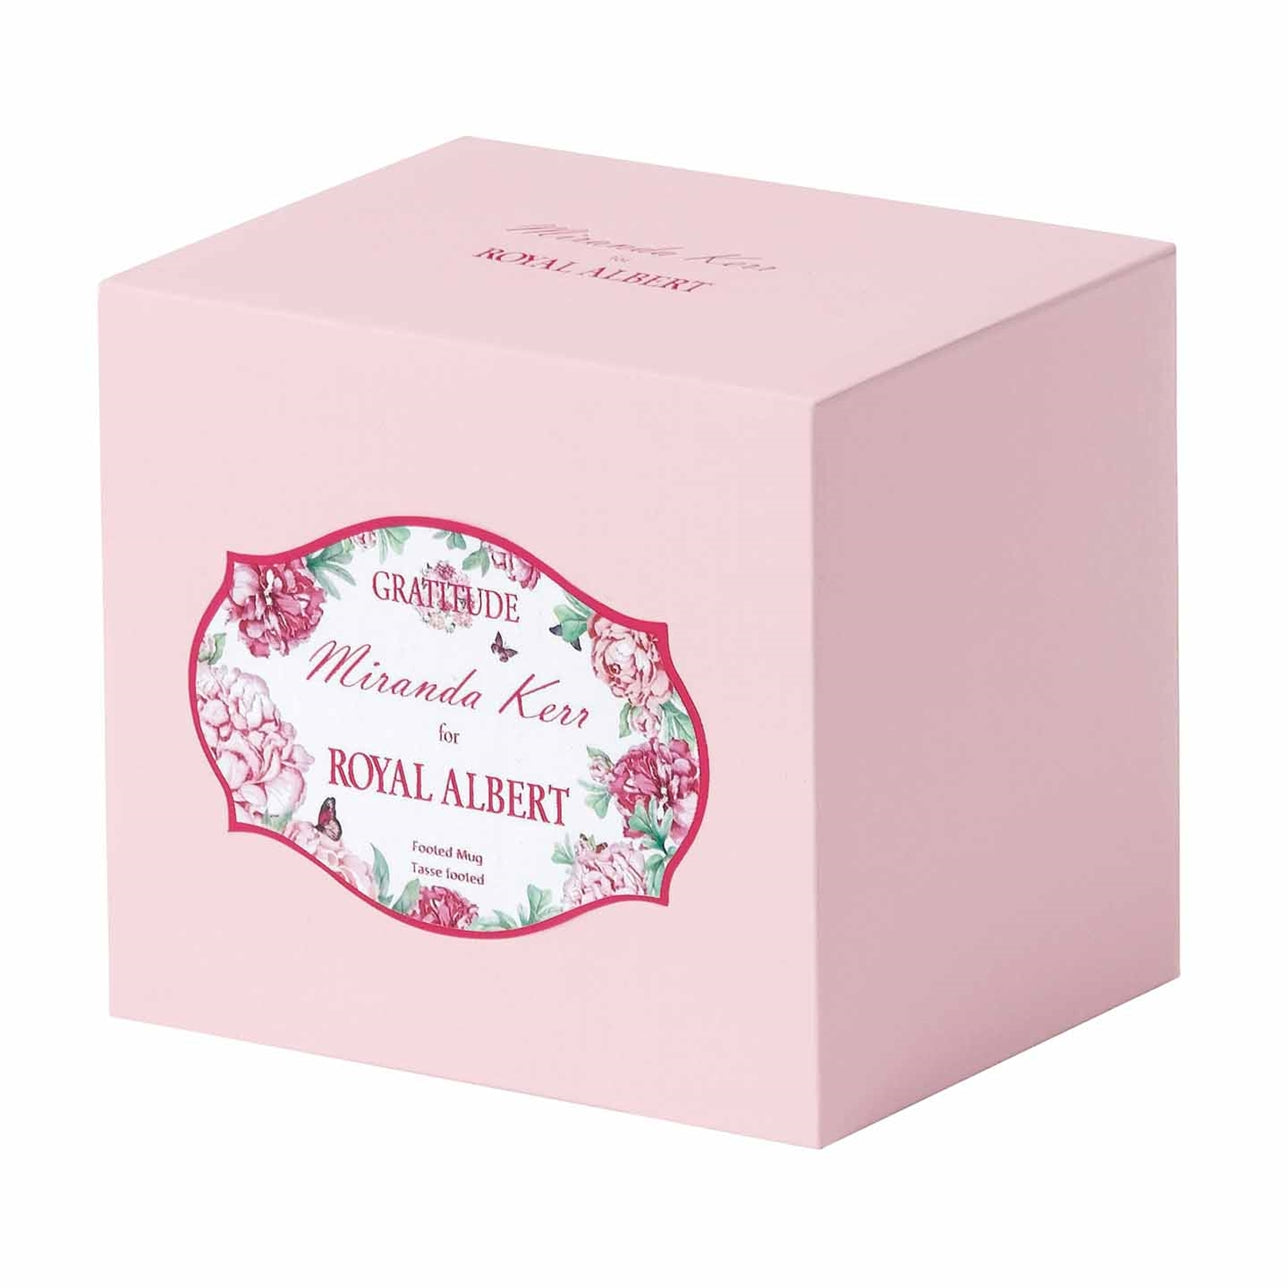 Royal Albert Miranda Kerr Gratitude Mug  Delicate, delightful and totally Miranda, makes this item the perfect gift for the sophisticated and feminine woman, who enjoys to celebrate with friends or simply when she needs to take time for herself with a nice mug of tea or coffee. 'Gratitude' features a sophisticated scattering of peach and pink peony flowers; peppered with signature multi-coloured, purple and turquoise butterflies.